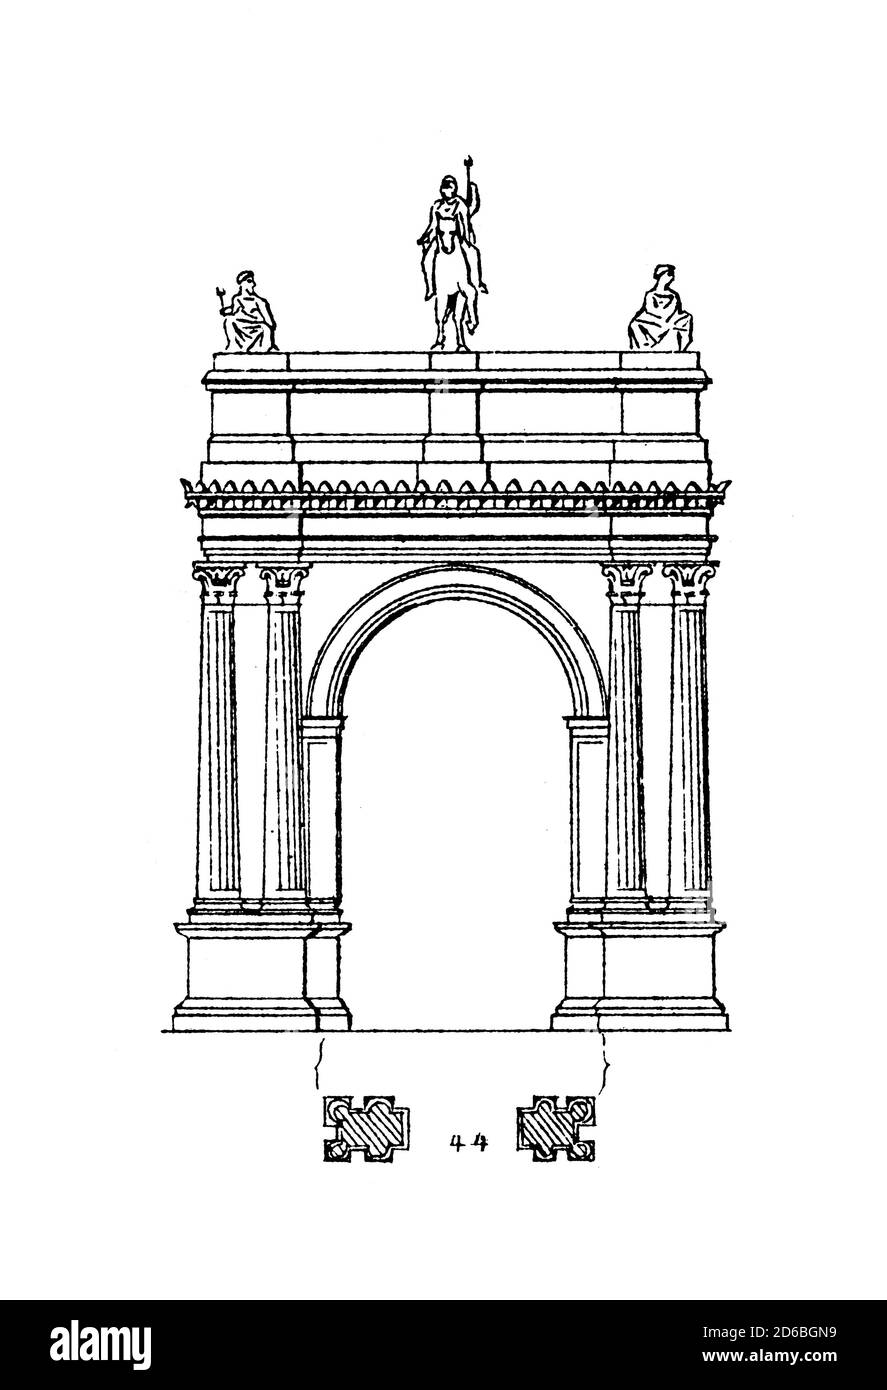 Antique engraving of the arch of the Sergii in Pula, Croatia. Illustration published in Vergleichende Architektonische Formenlehre by Carl Scholtze, L Stock Photo